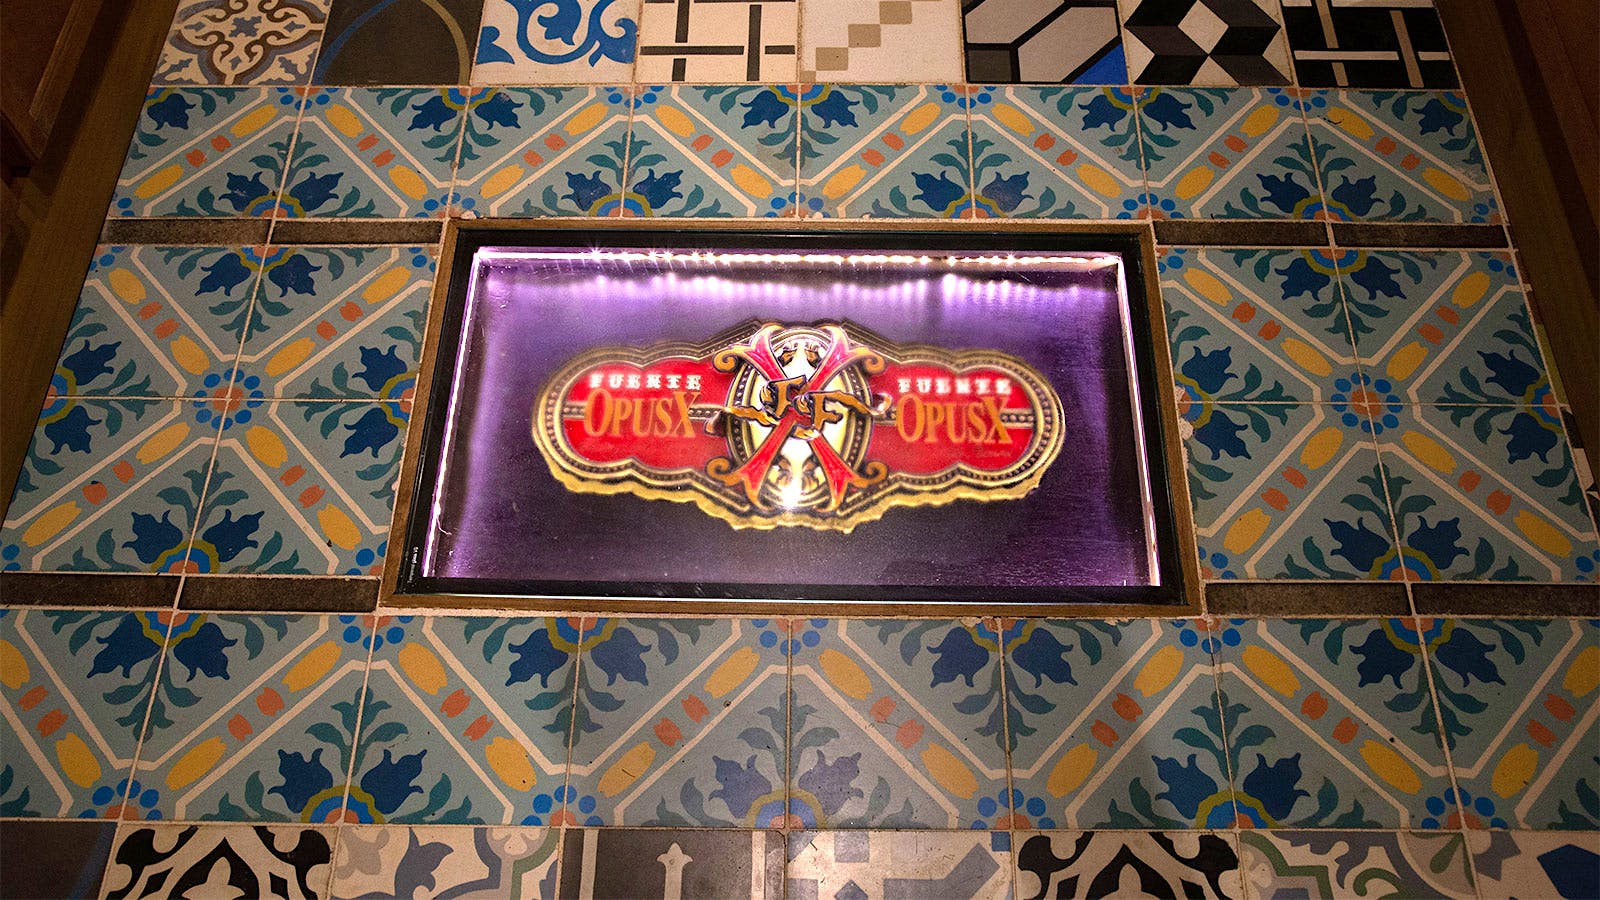 An enlarged replica of the famous OpusX band under plexiglass, lit up by LEDs, has been inlaid into the floor tile of the brand’s dedicated aging room.